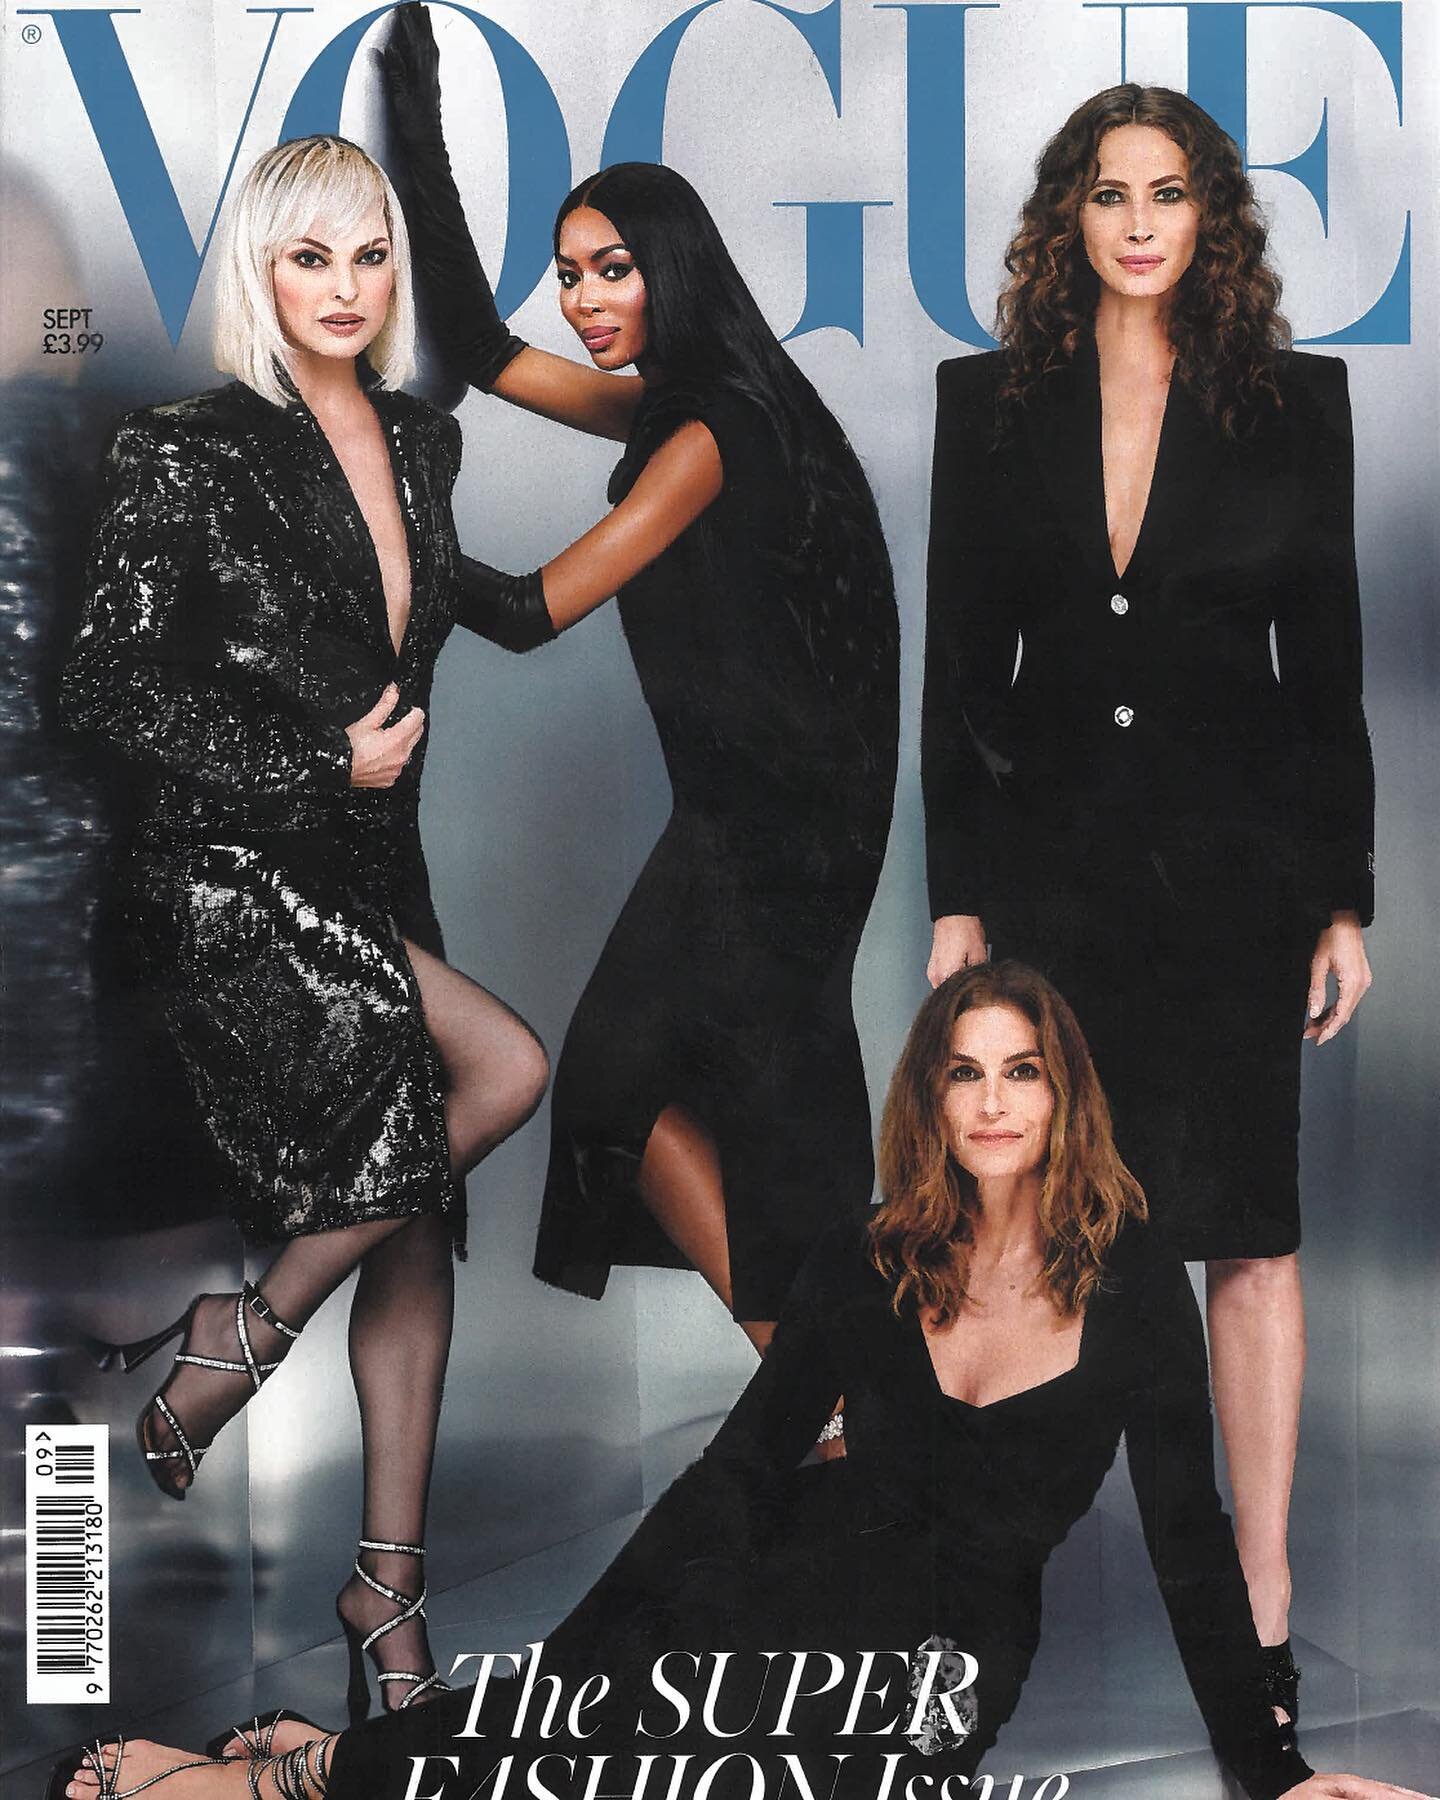 Being featured in this issue of British Vogue, where the original supermodels grace the cover, is such an honor and a beautiful 'clin d'oeil&rsquo; to my mid-thirties. 

In a world that often celebrates youth, this feature is a nod to the beauty and 